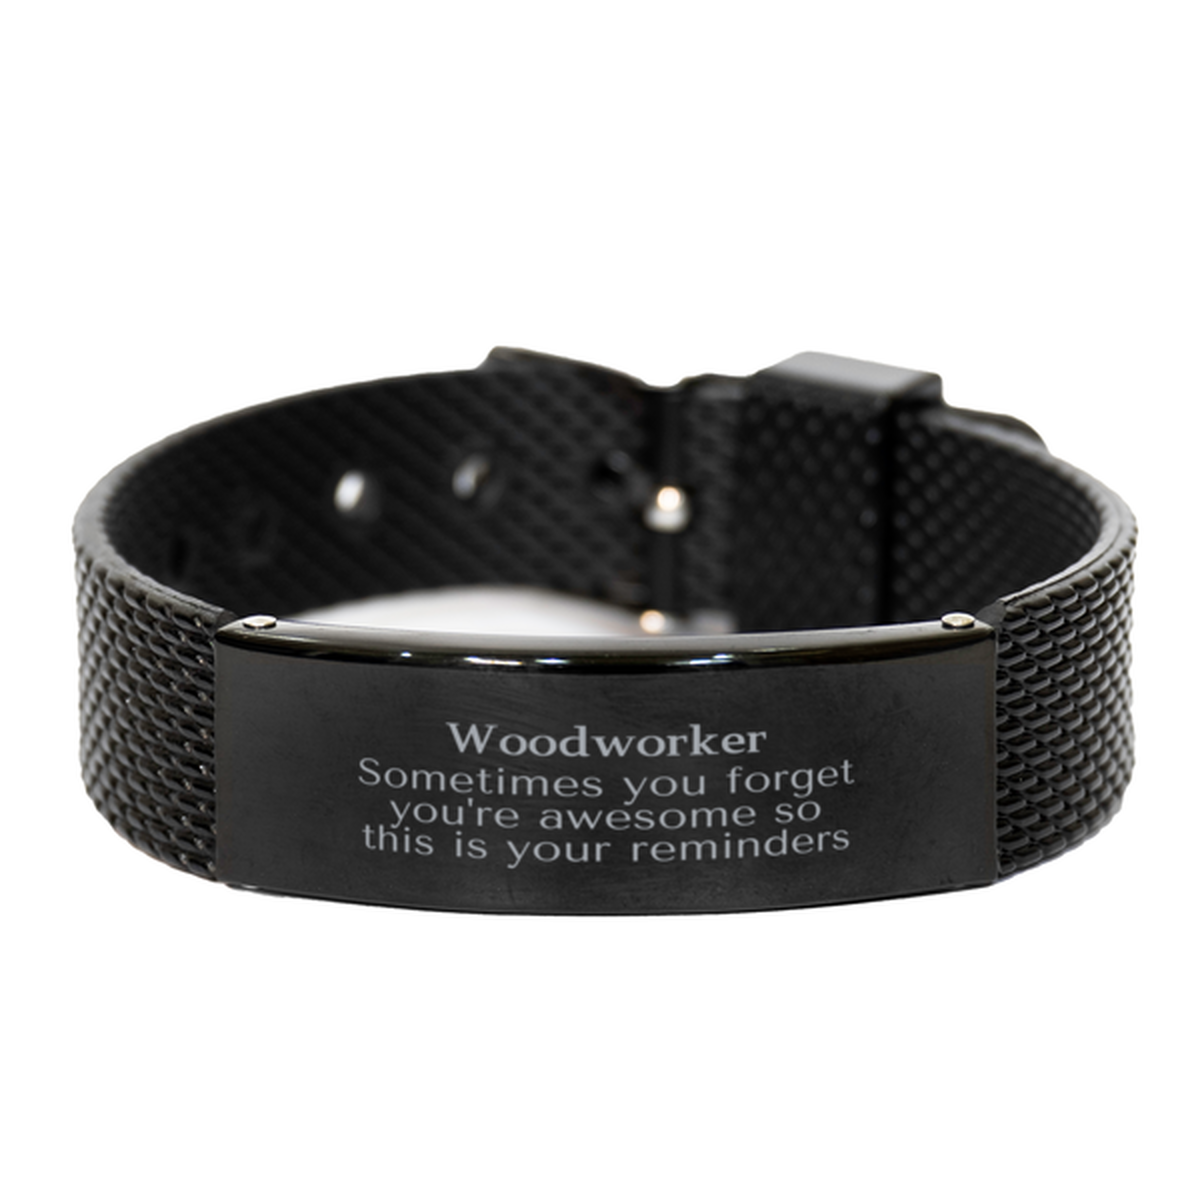 Sentimental Woodworker Black Shark Mesh Bracelet, Woodworker Sometimes you forget you're awesome so this is your reminders, Graduation Christmas Birthday Gifts for Woodworker, Men, Women, Coworkers